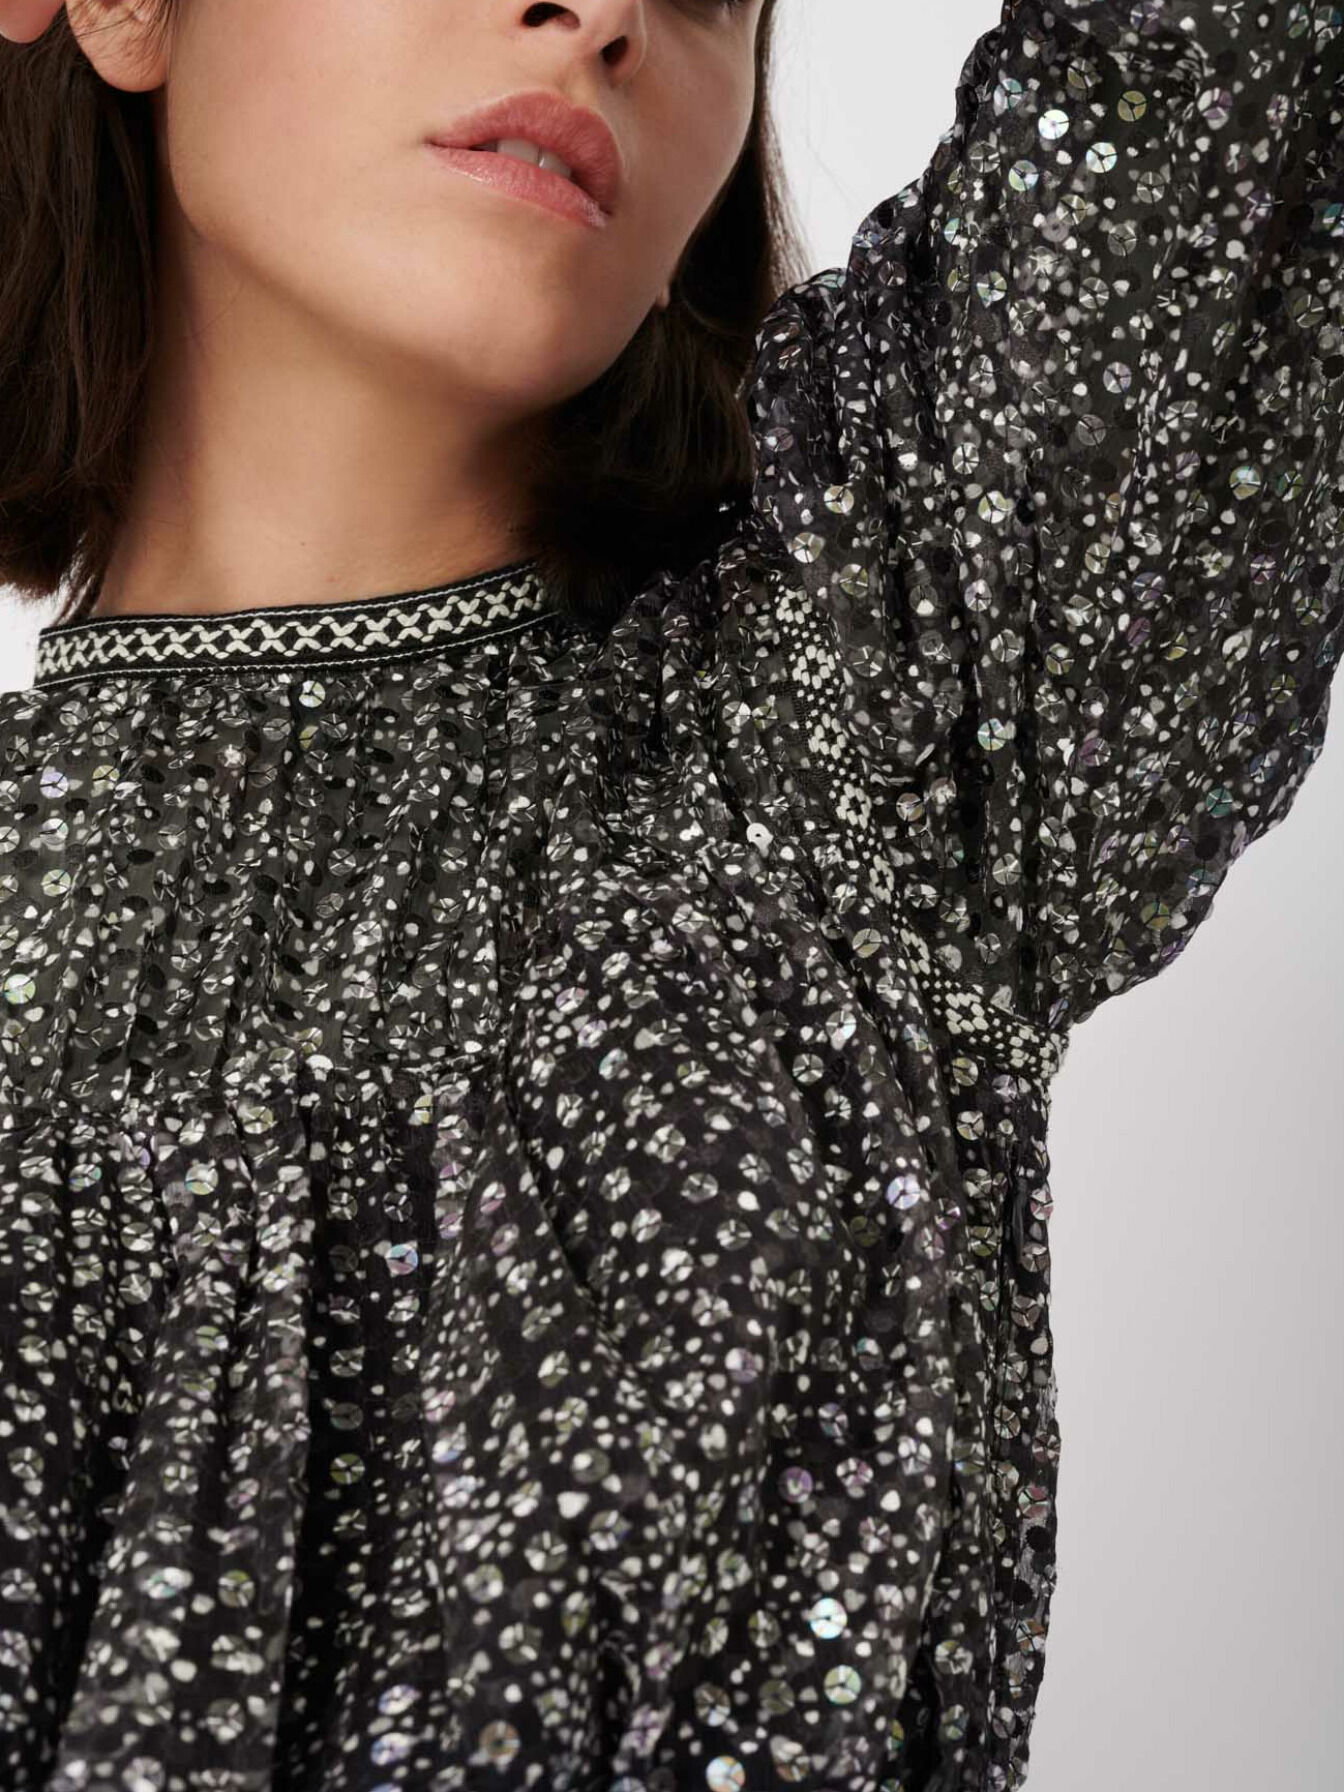 silver sequin dress outfit